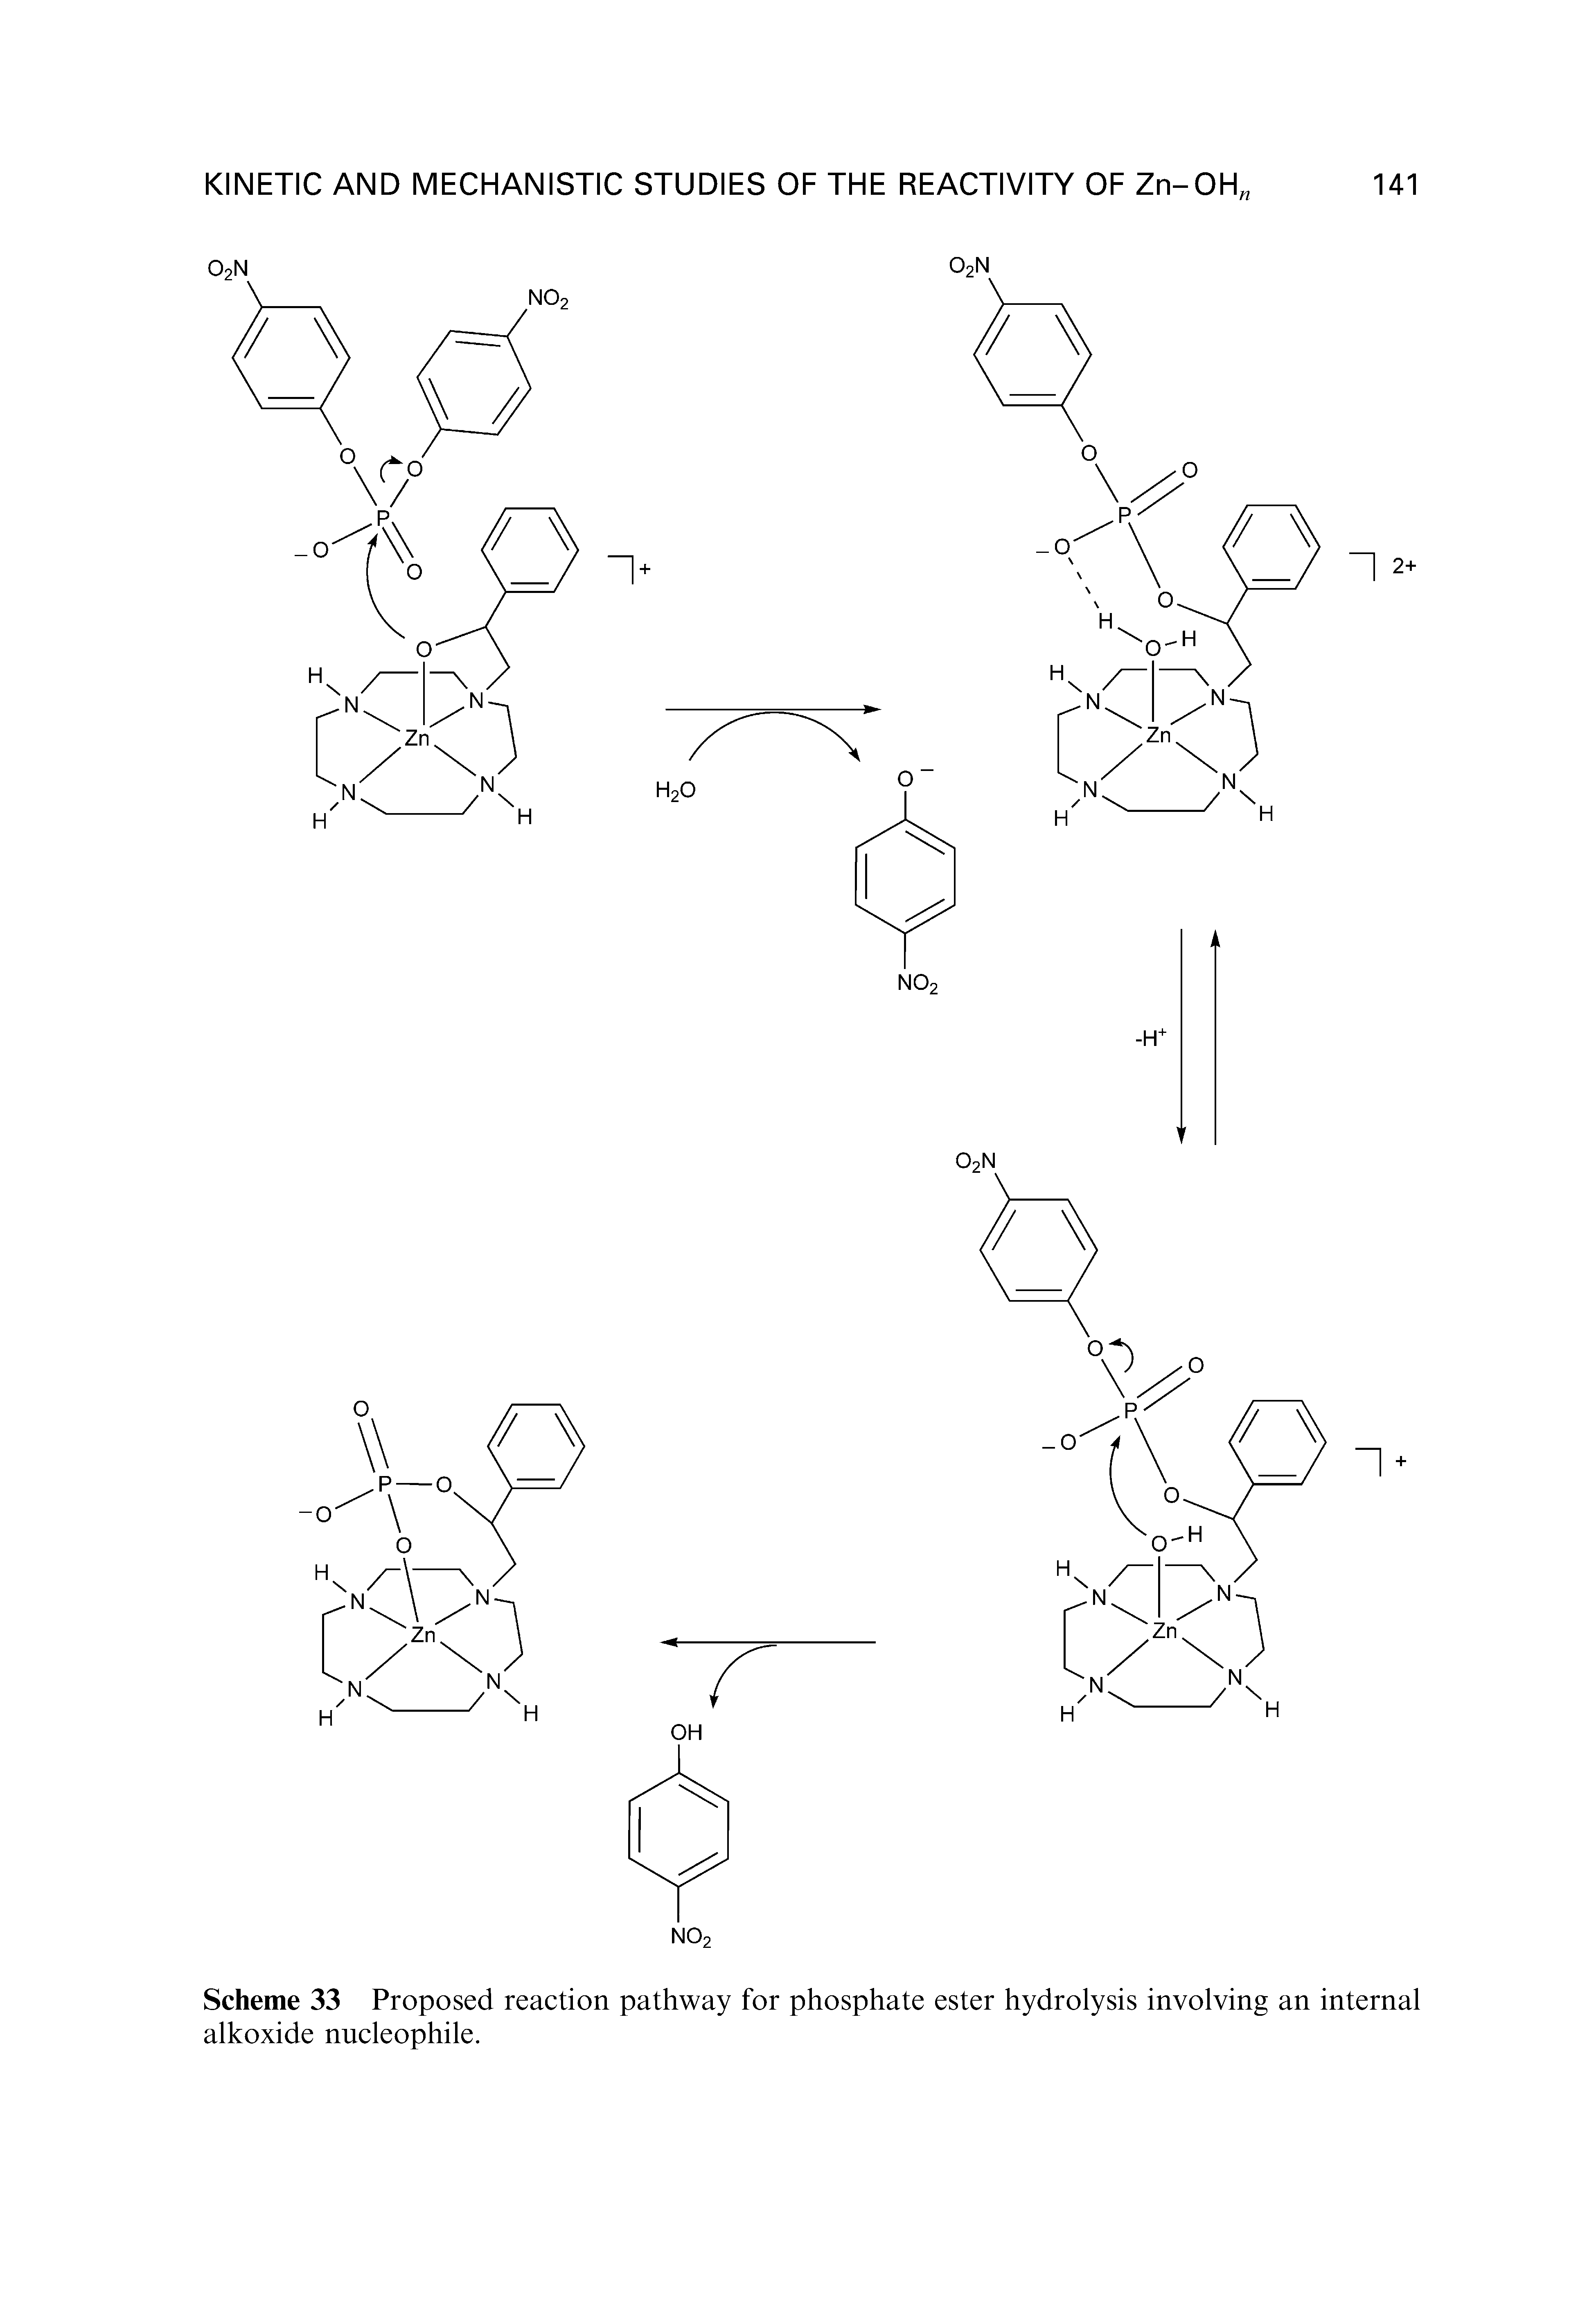 Scheme 33 Proposed reaction pathway for phosphate ester hydrolysis involving an internal alkoxide nucleophile.